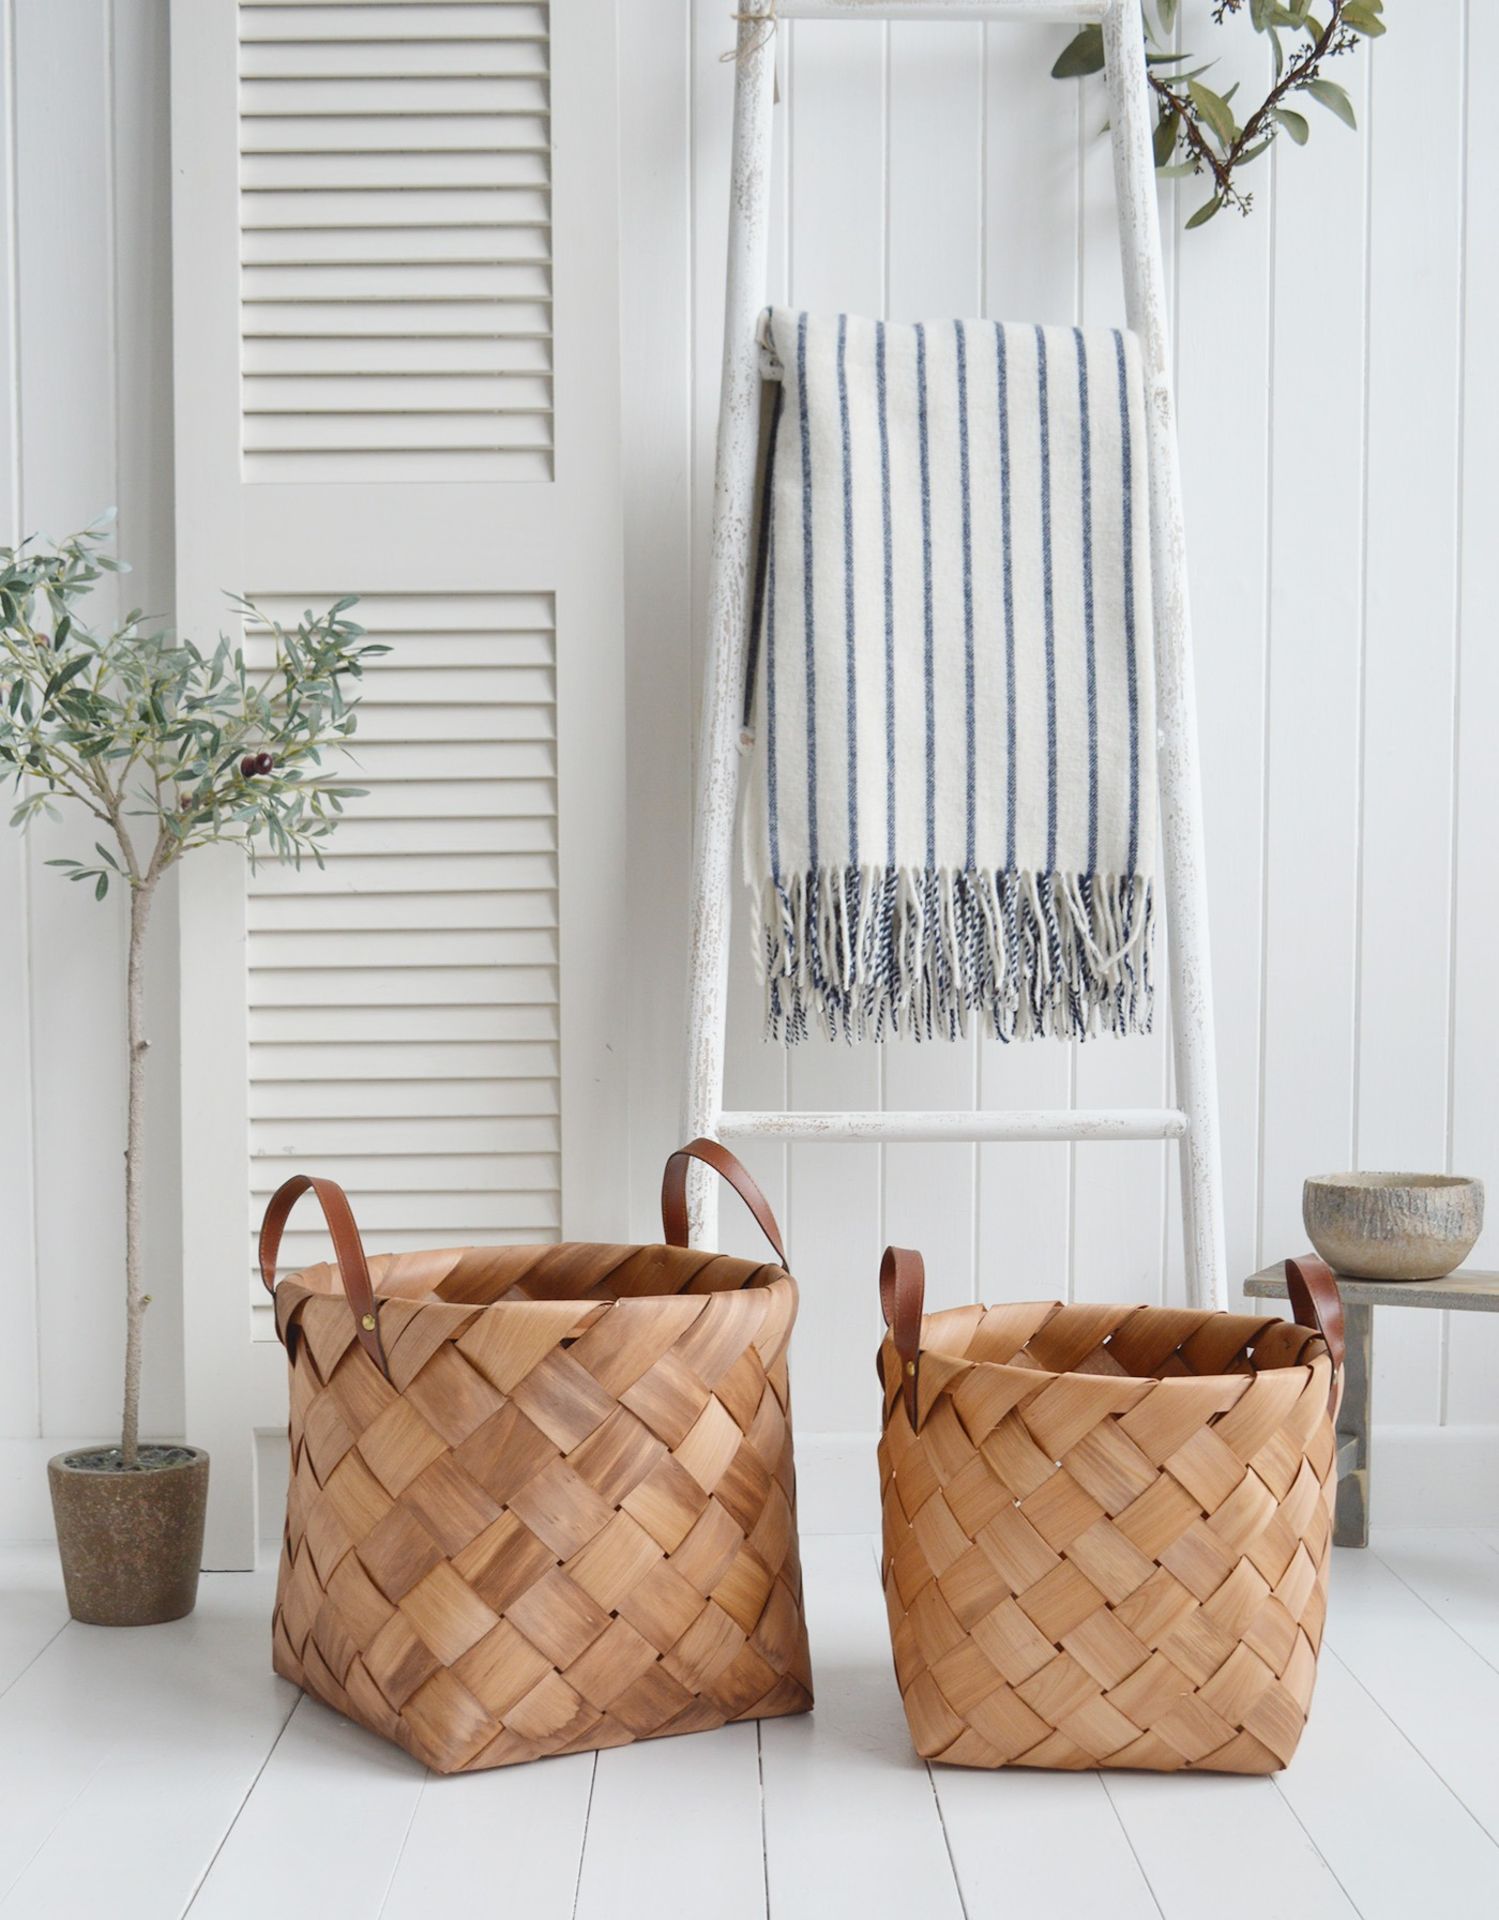 Set of Two Wooden Storage Baskets (LOCATION H/S 2.7.2)